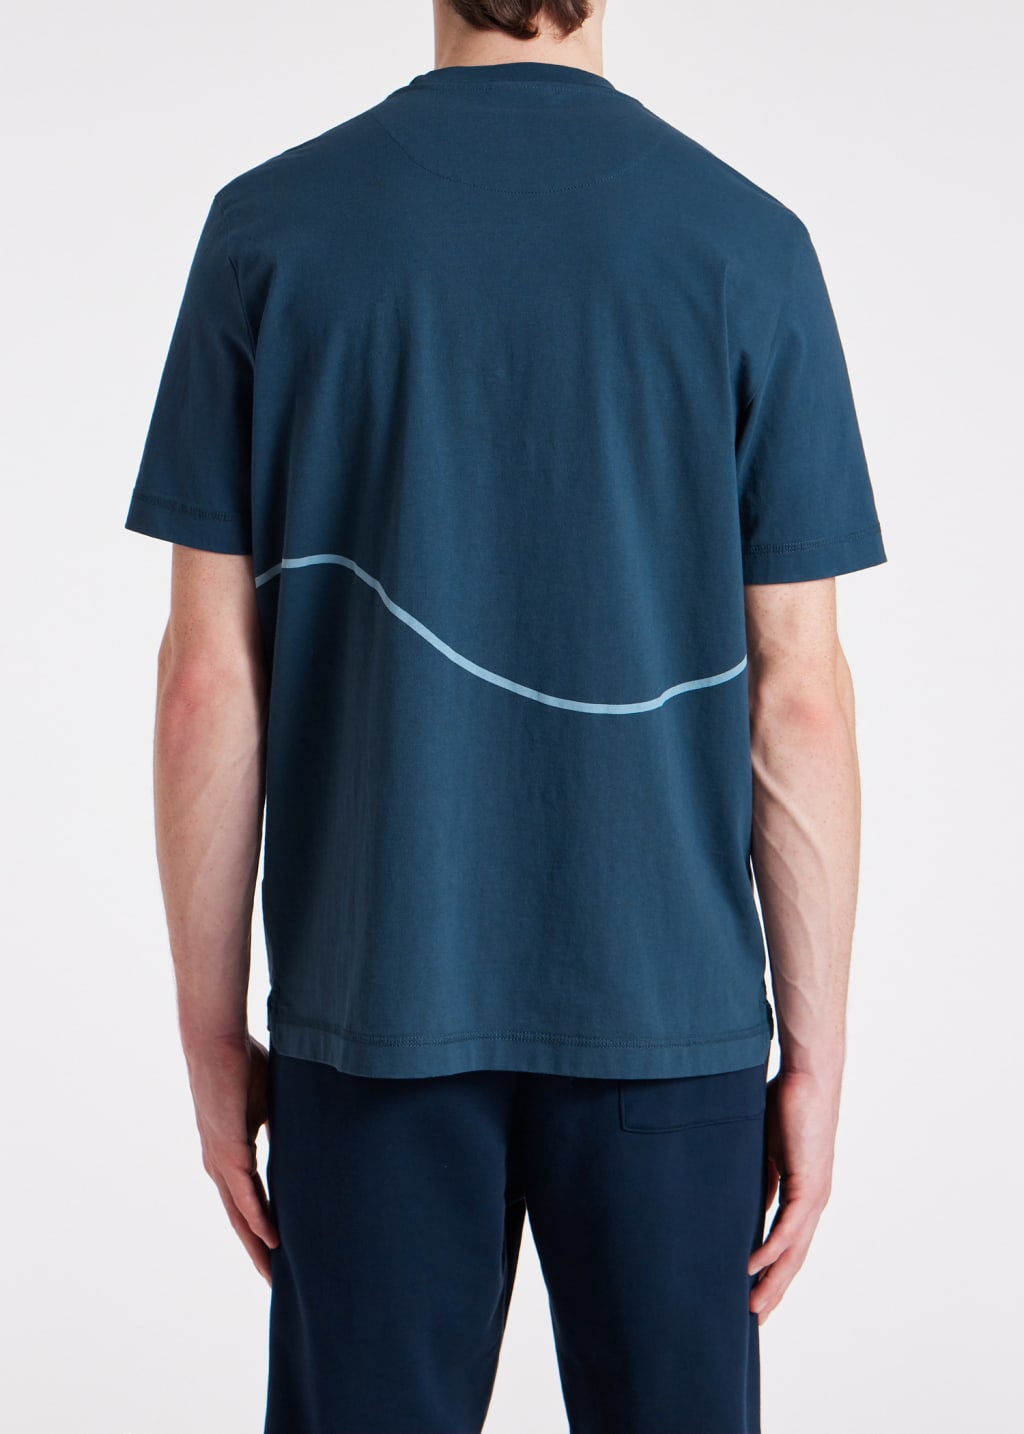 Model View - Navy Cotton 'Happy' Wave T-Shirt Paul Smith